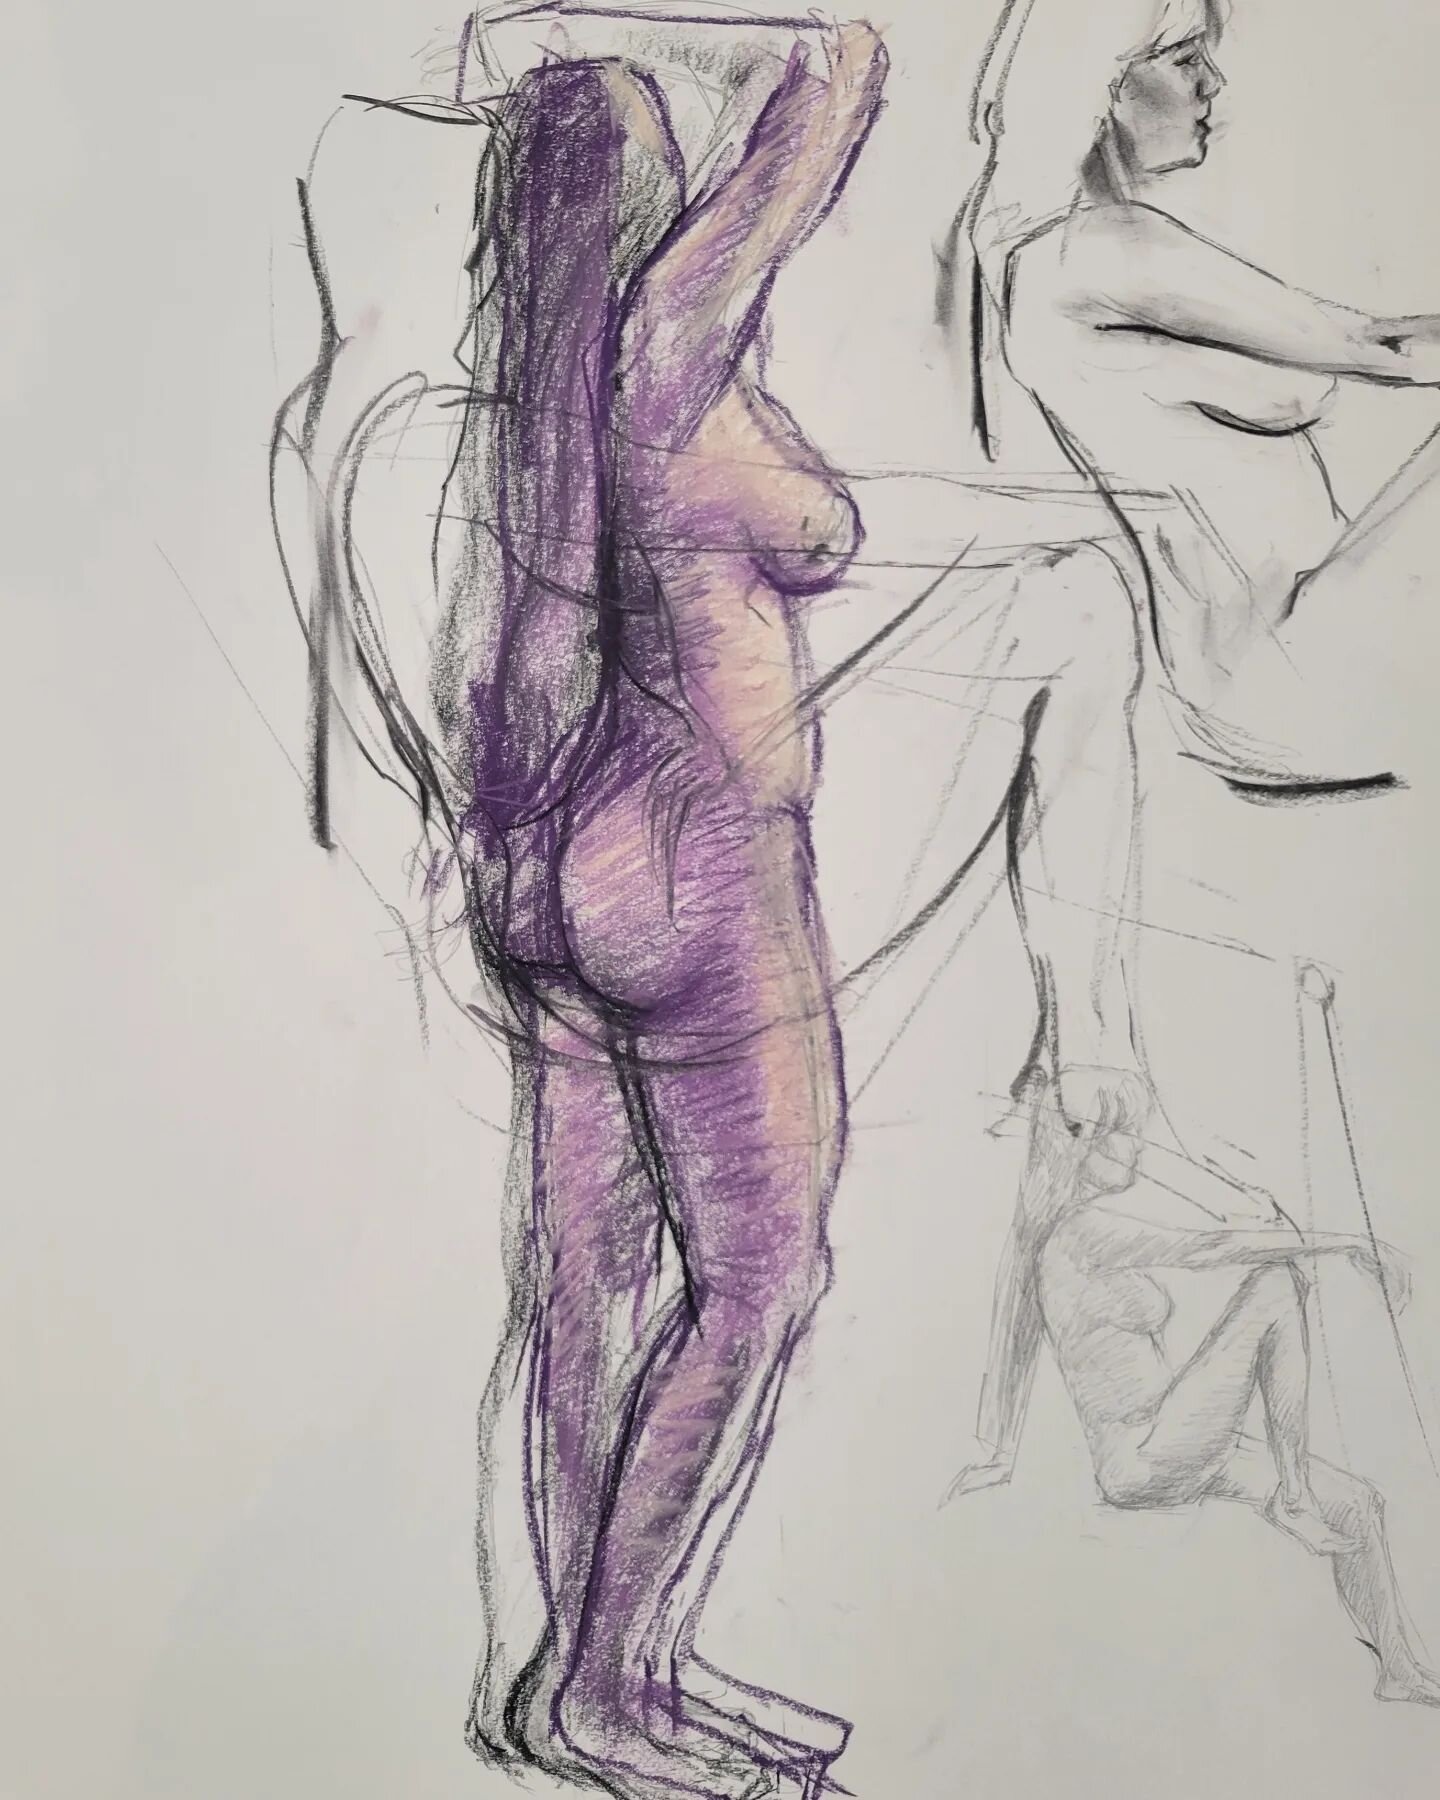 Collaborative Drawings from last week's drawing visit hosted by Rick and @monicamsegal 
Drawings made by @willcottonnyc @alyssamonks @lisa_lebofsky @michellelynndoll and Alison Elizabeth Taylor and myself. We each drew the model for 10 min, then work